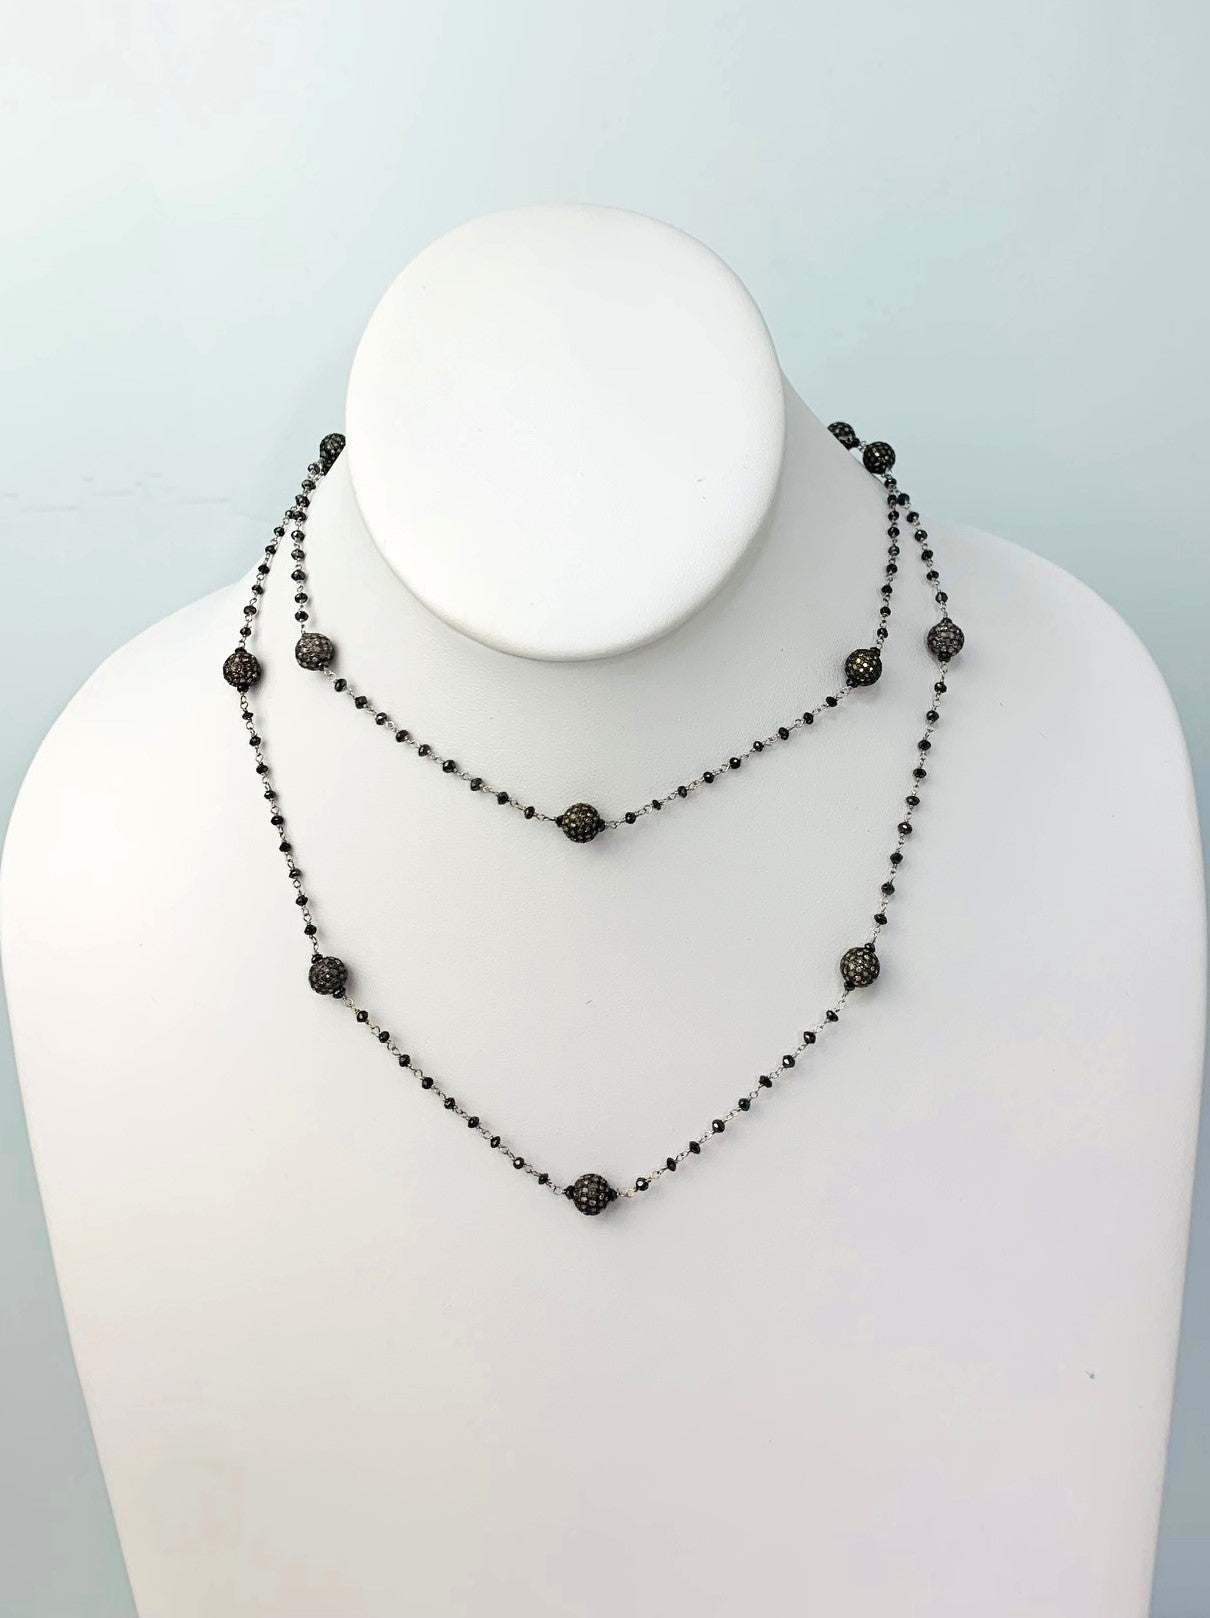 31" Black Diamond Rosary Necklace With Blackened Sterling Silver Pave Diamond Beads in 14KW, SS - NCK-386-DCOROSDIA14WSS-BLKGRY-31 20.25ctw